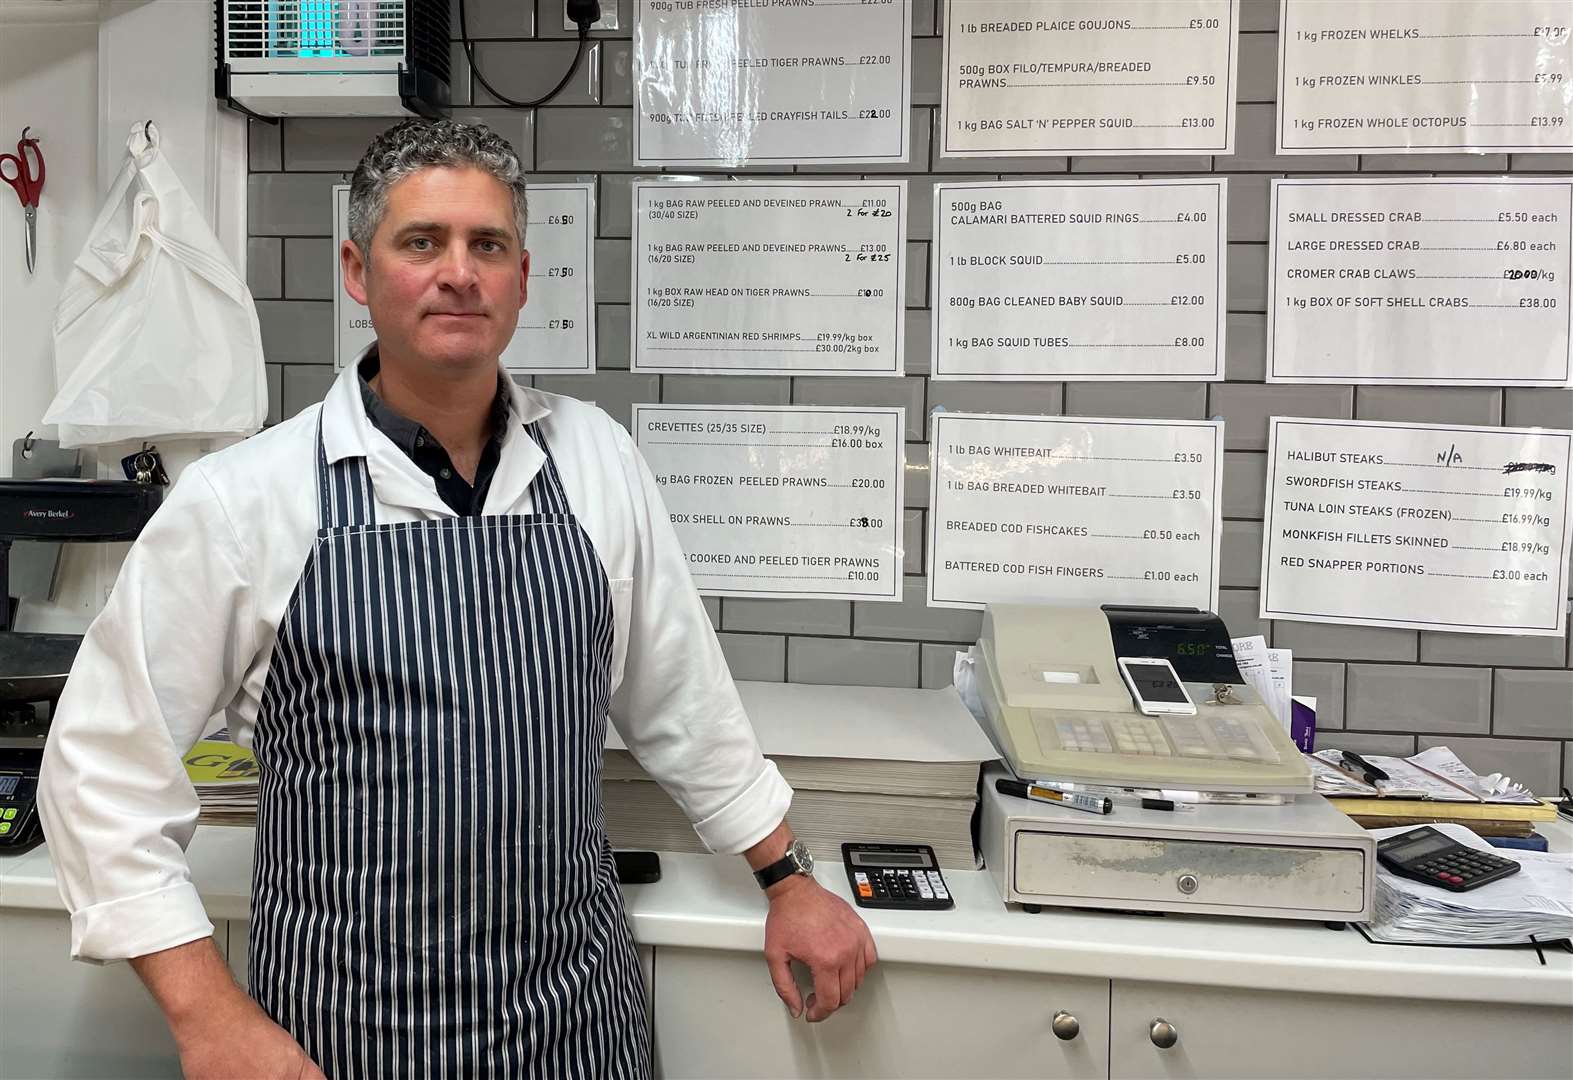 Co-owner of Hales and Moore Fishmongers Bradley Moore said customers have been complaining